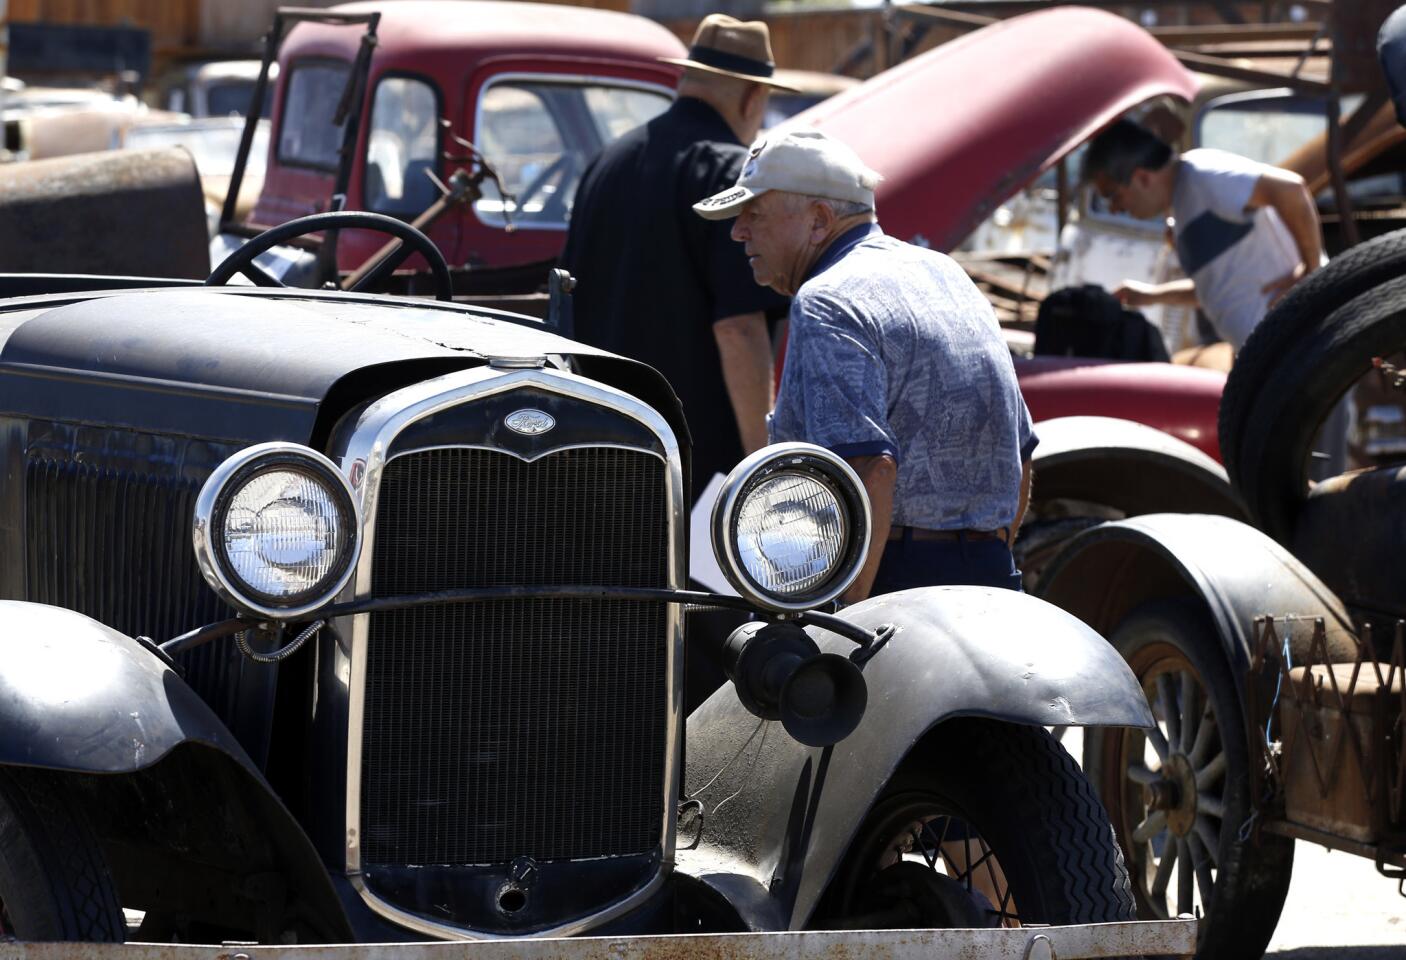 Prospective buyers turn out to place their bids on dozens of collectible cars, car parts, tractors and a small plane at an auction in Santa Ana on Tuesday.